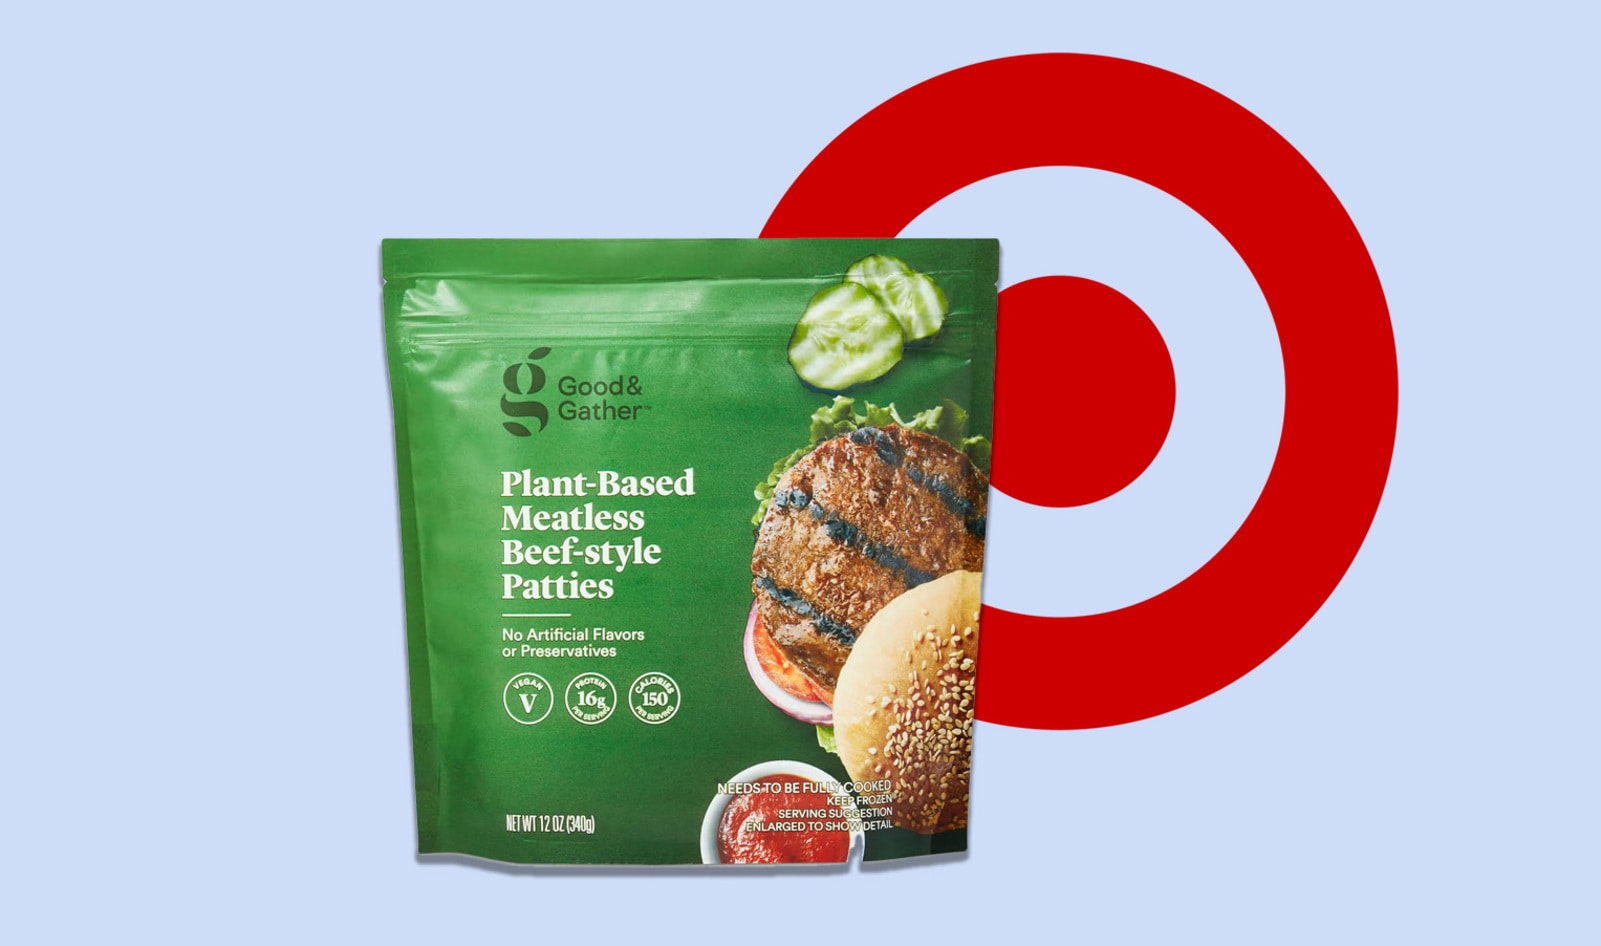 Target Launches Its Own Plant-Based Burgers